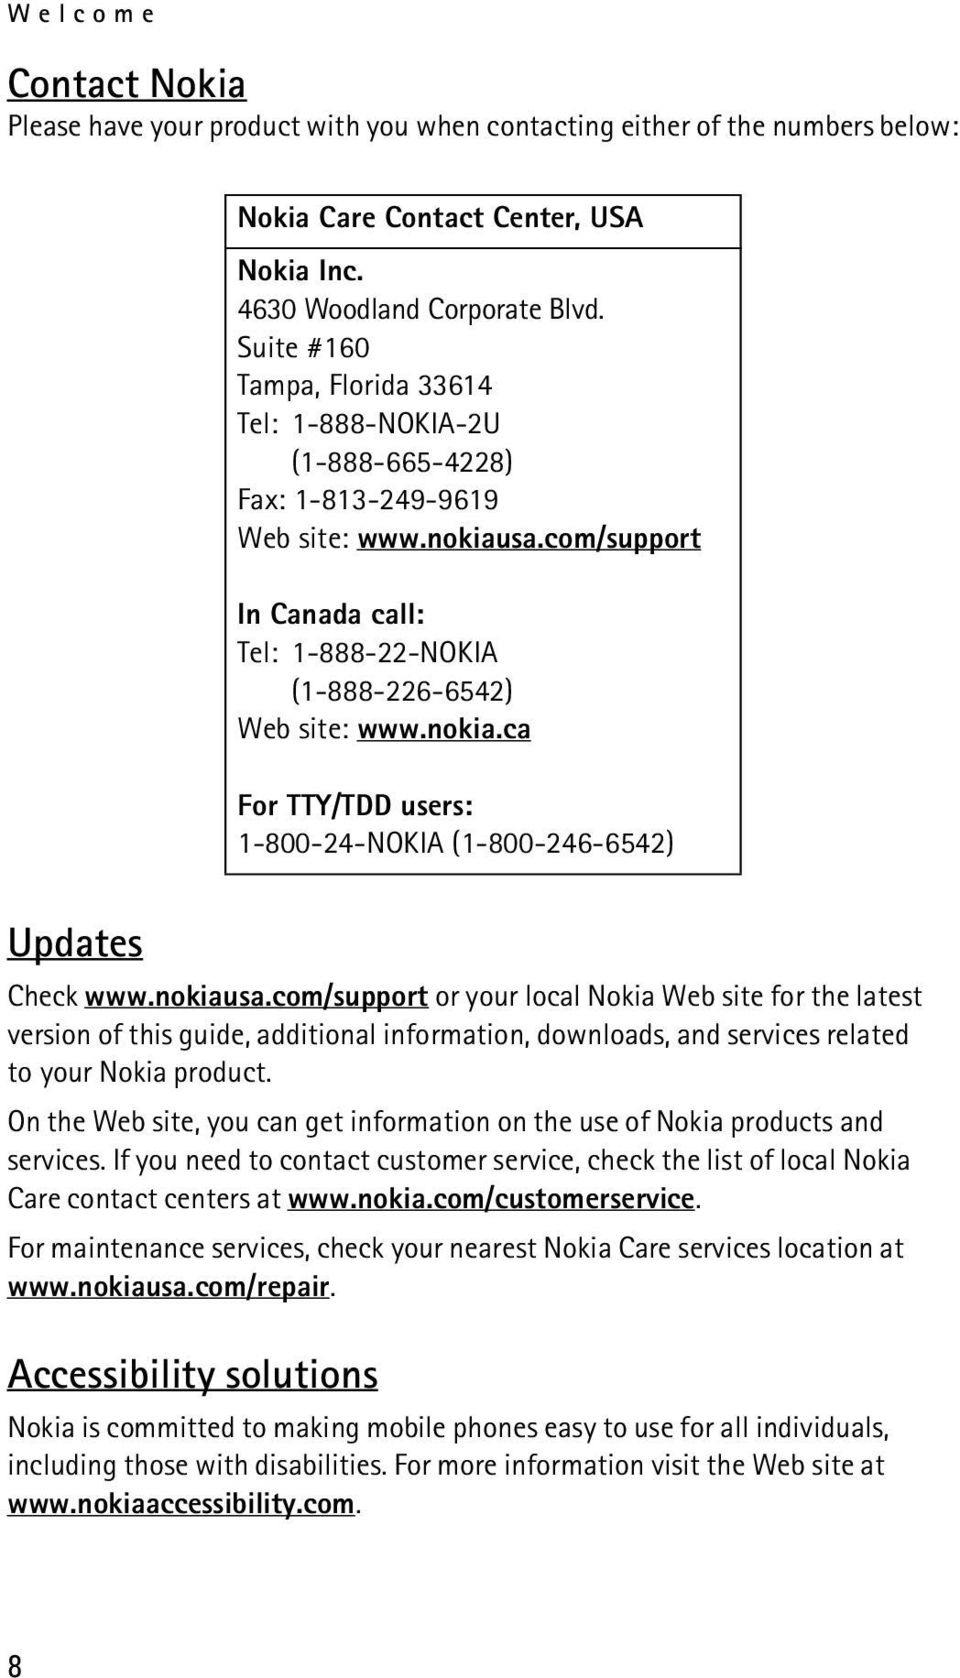 nokiausa.com/support or your local Nokia Web site for the latest version of this guide, additional information, downloads, and services related to your Nokia product.